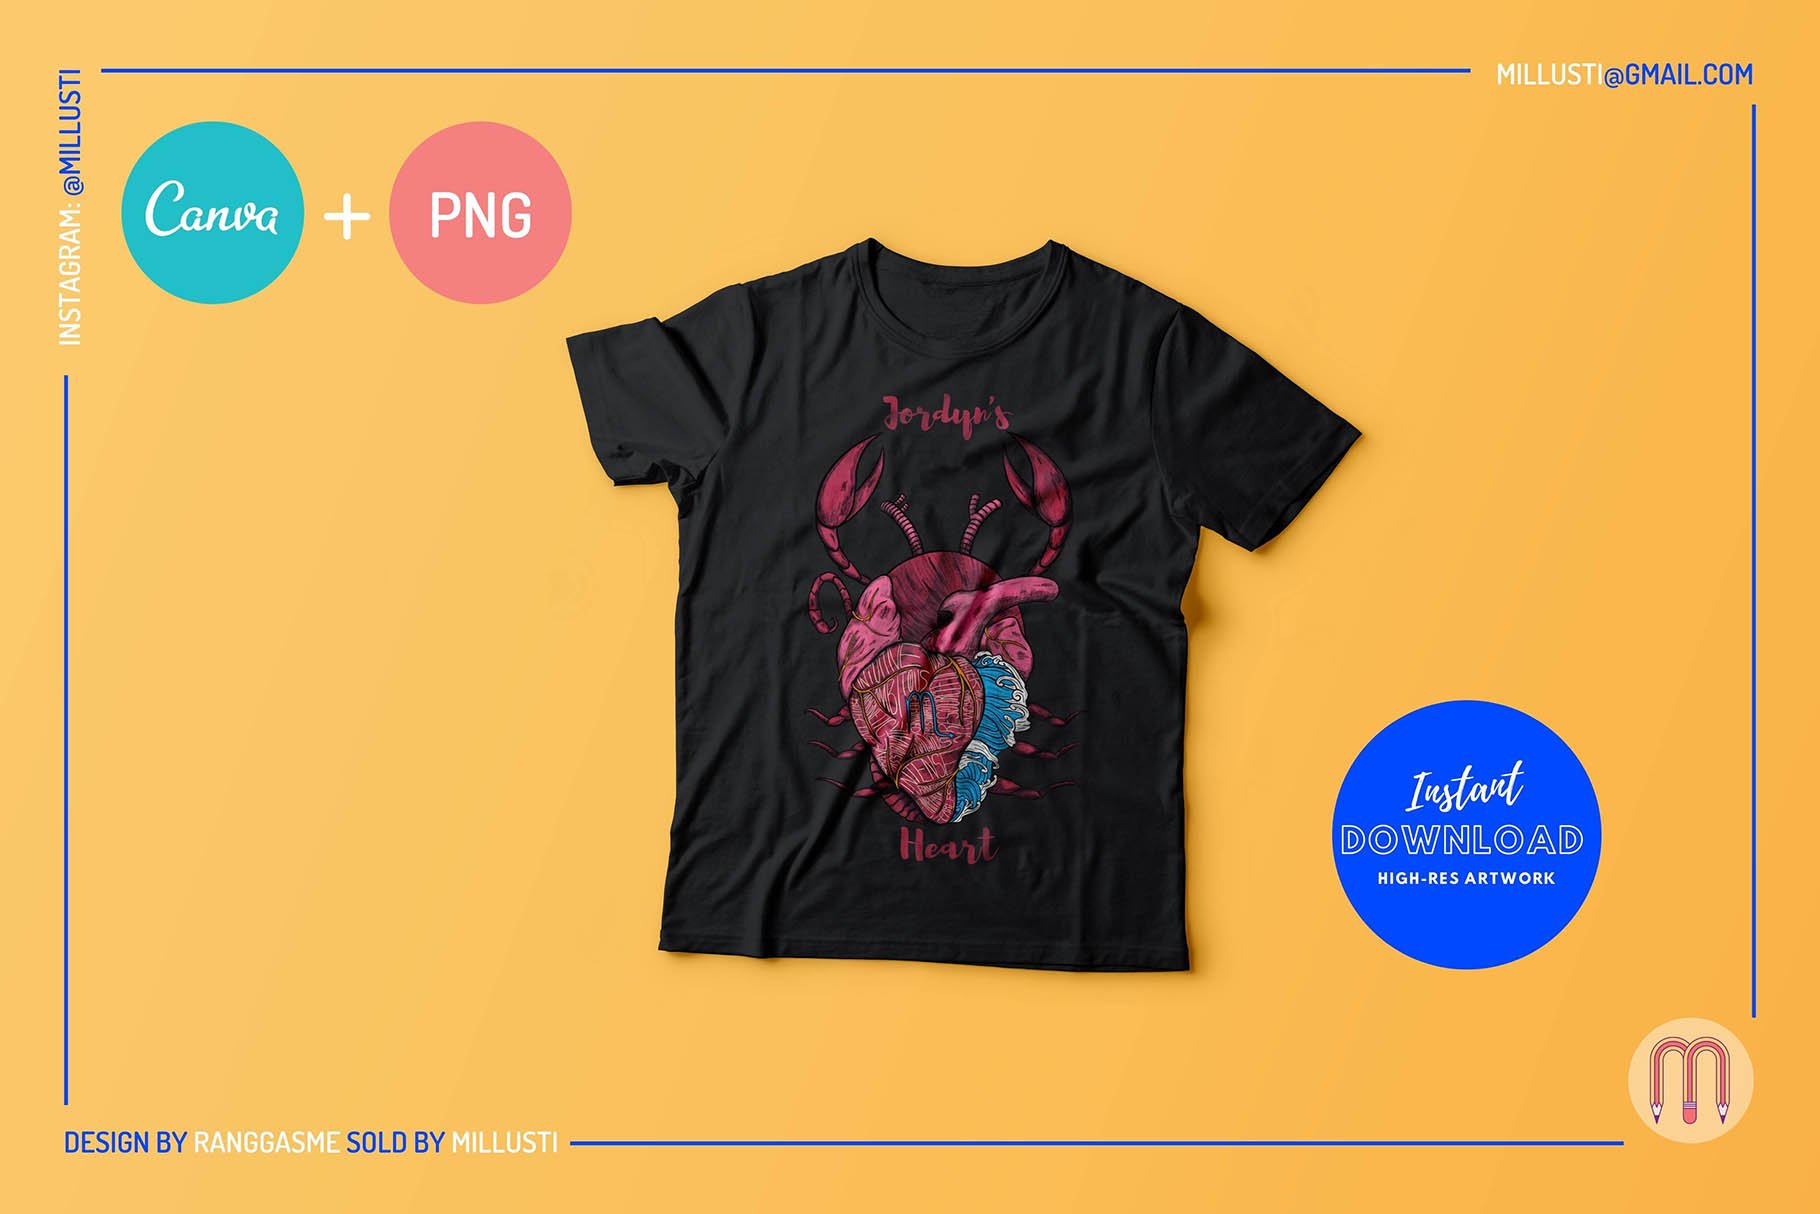 So cool black t-shirt with the astrology heart.